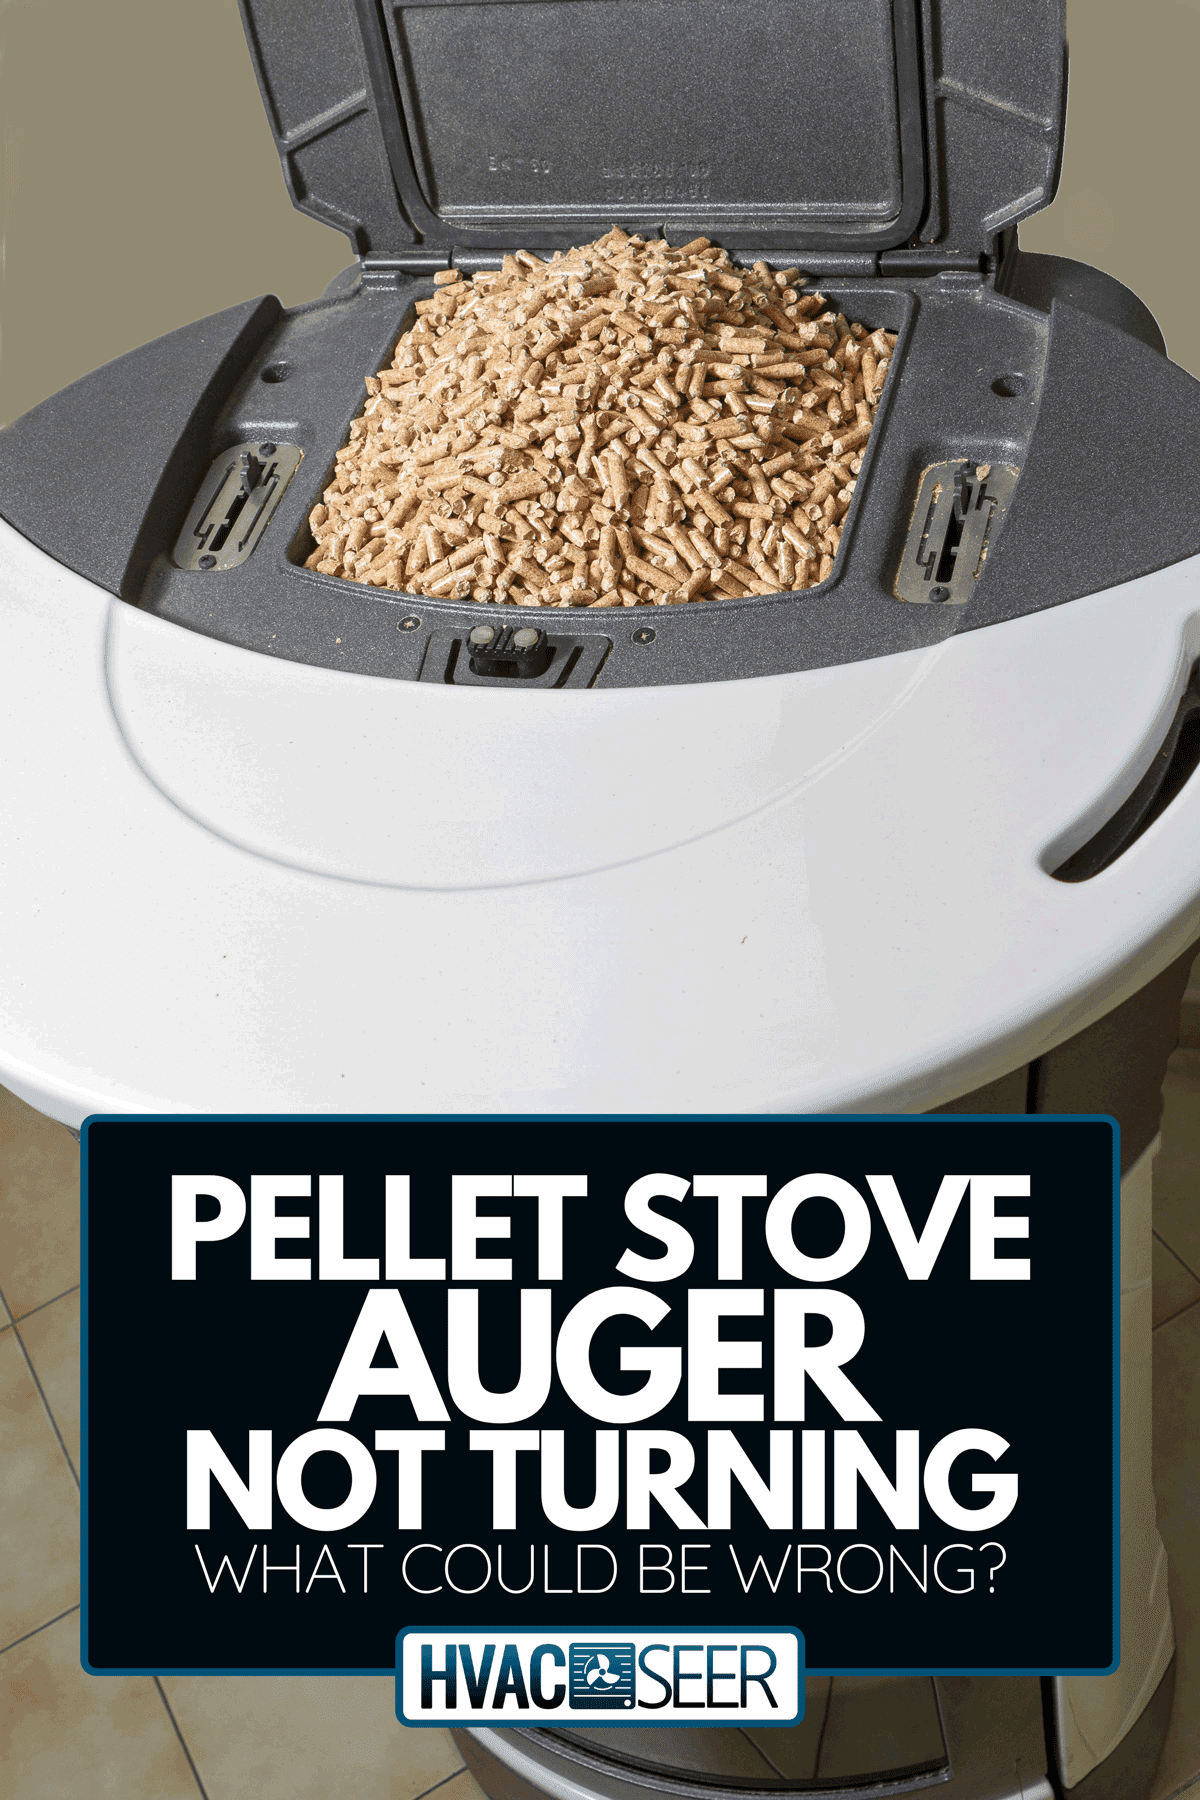 Renewable energy auger stove, Pellet Stove Auger Not Turning - What Could Be Wrong?